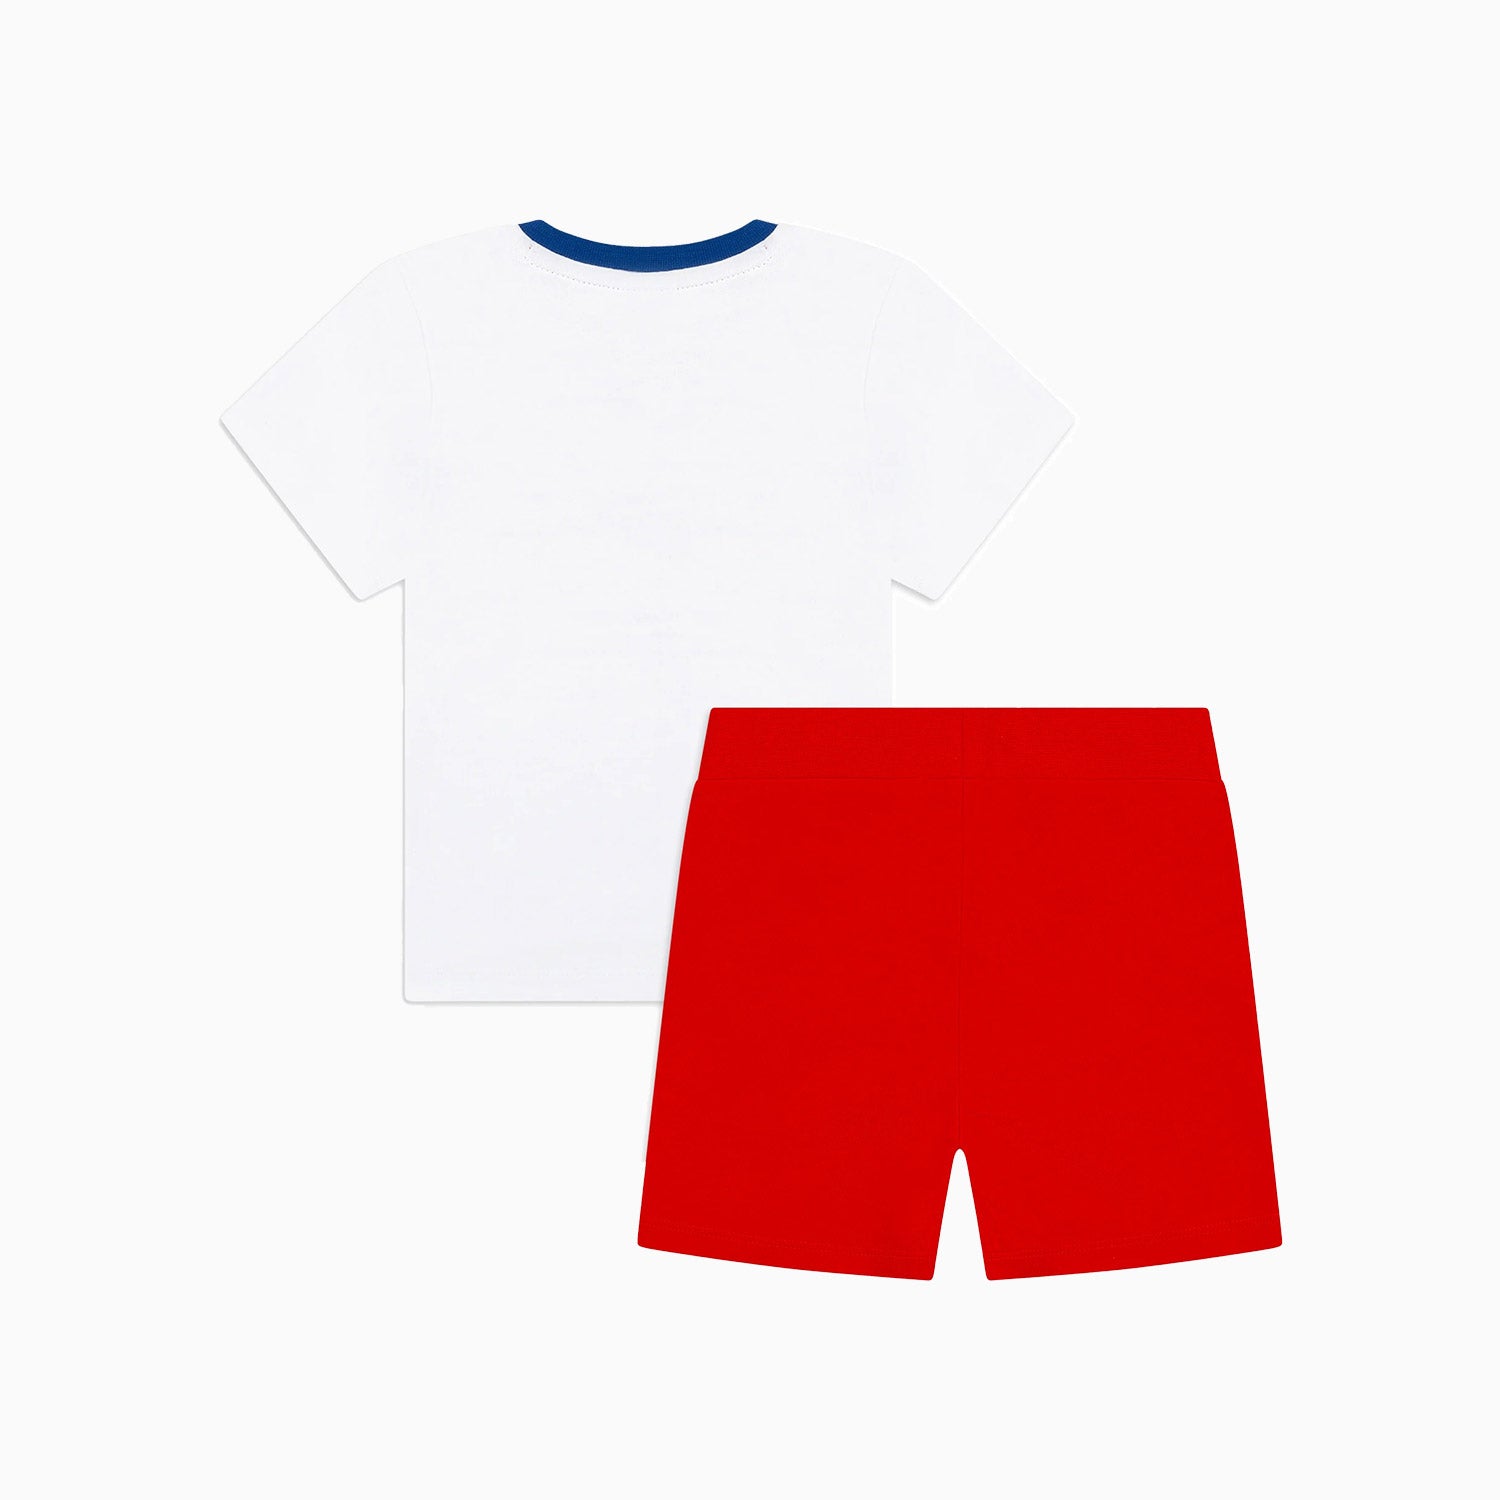 hugo-boss-kids-t-shirt-and-shorts-outfit-toddlers-j08058-871